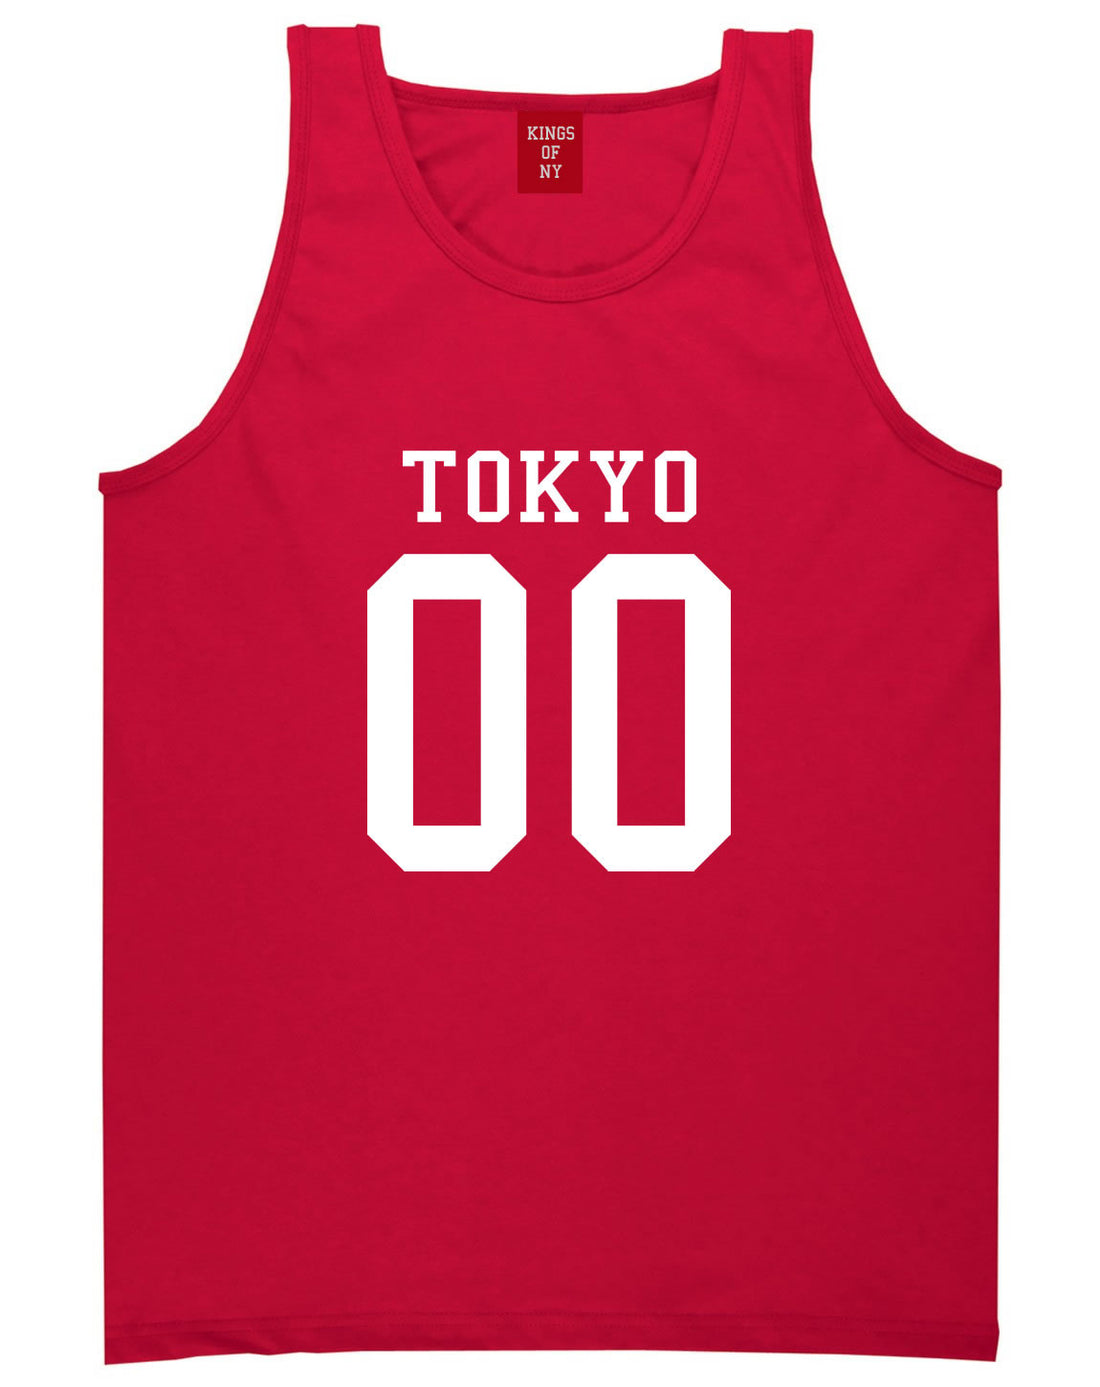 Tokyo Team 00 Jersey Japan Tank Top in Red By Kings Of NY